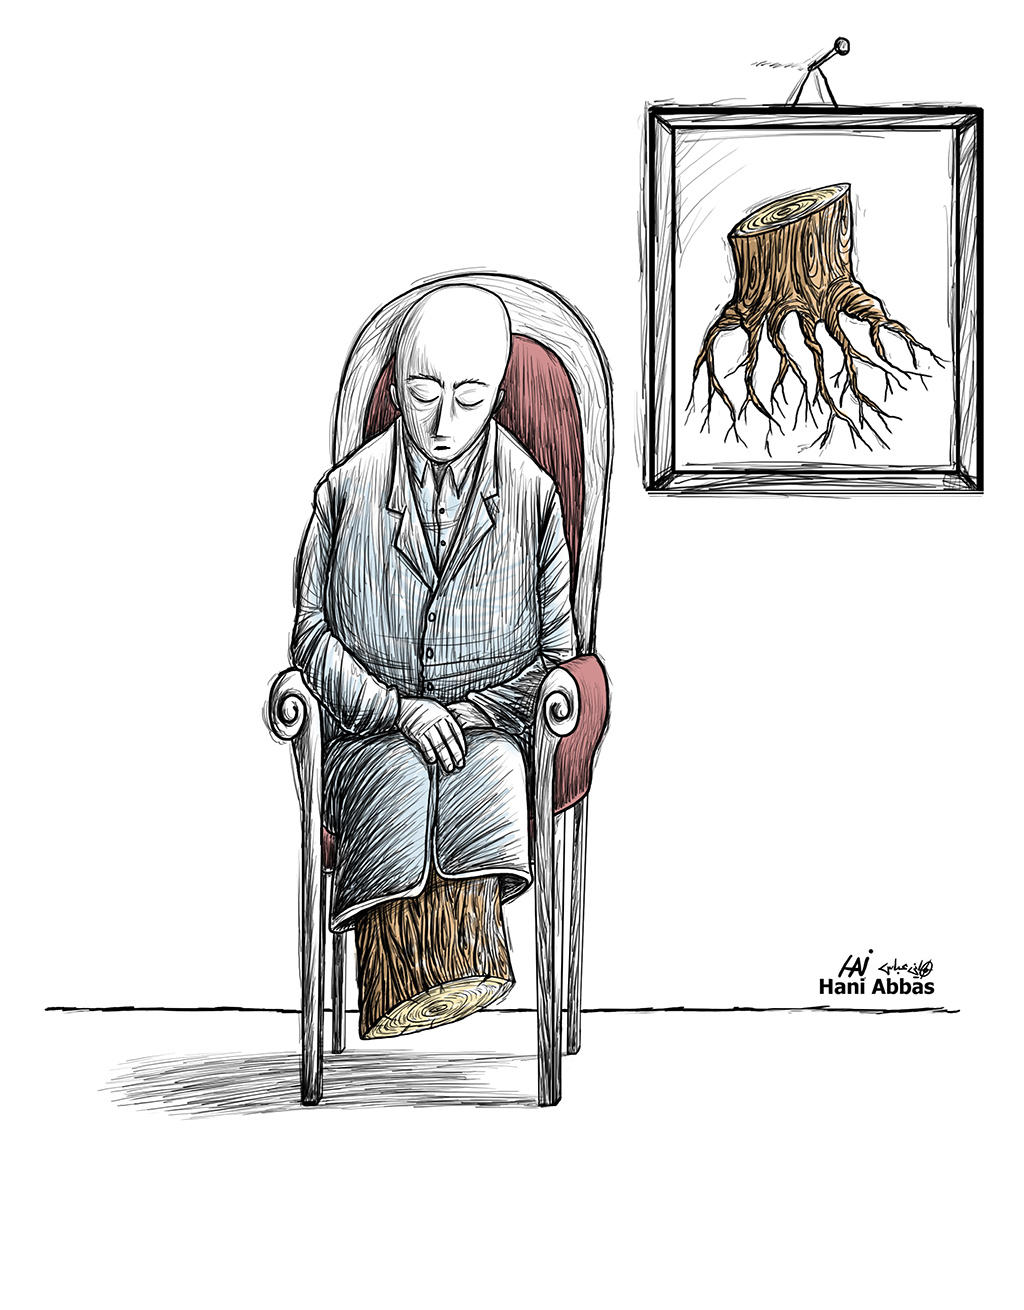 A man sits in a chair